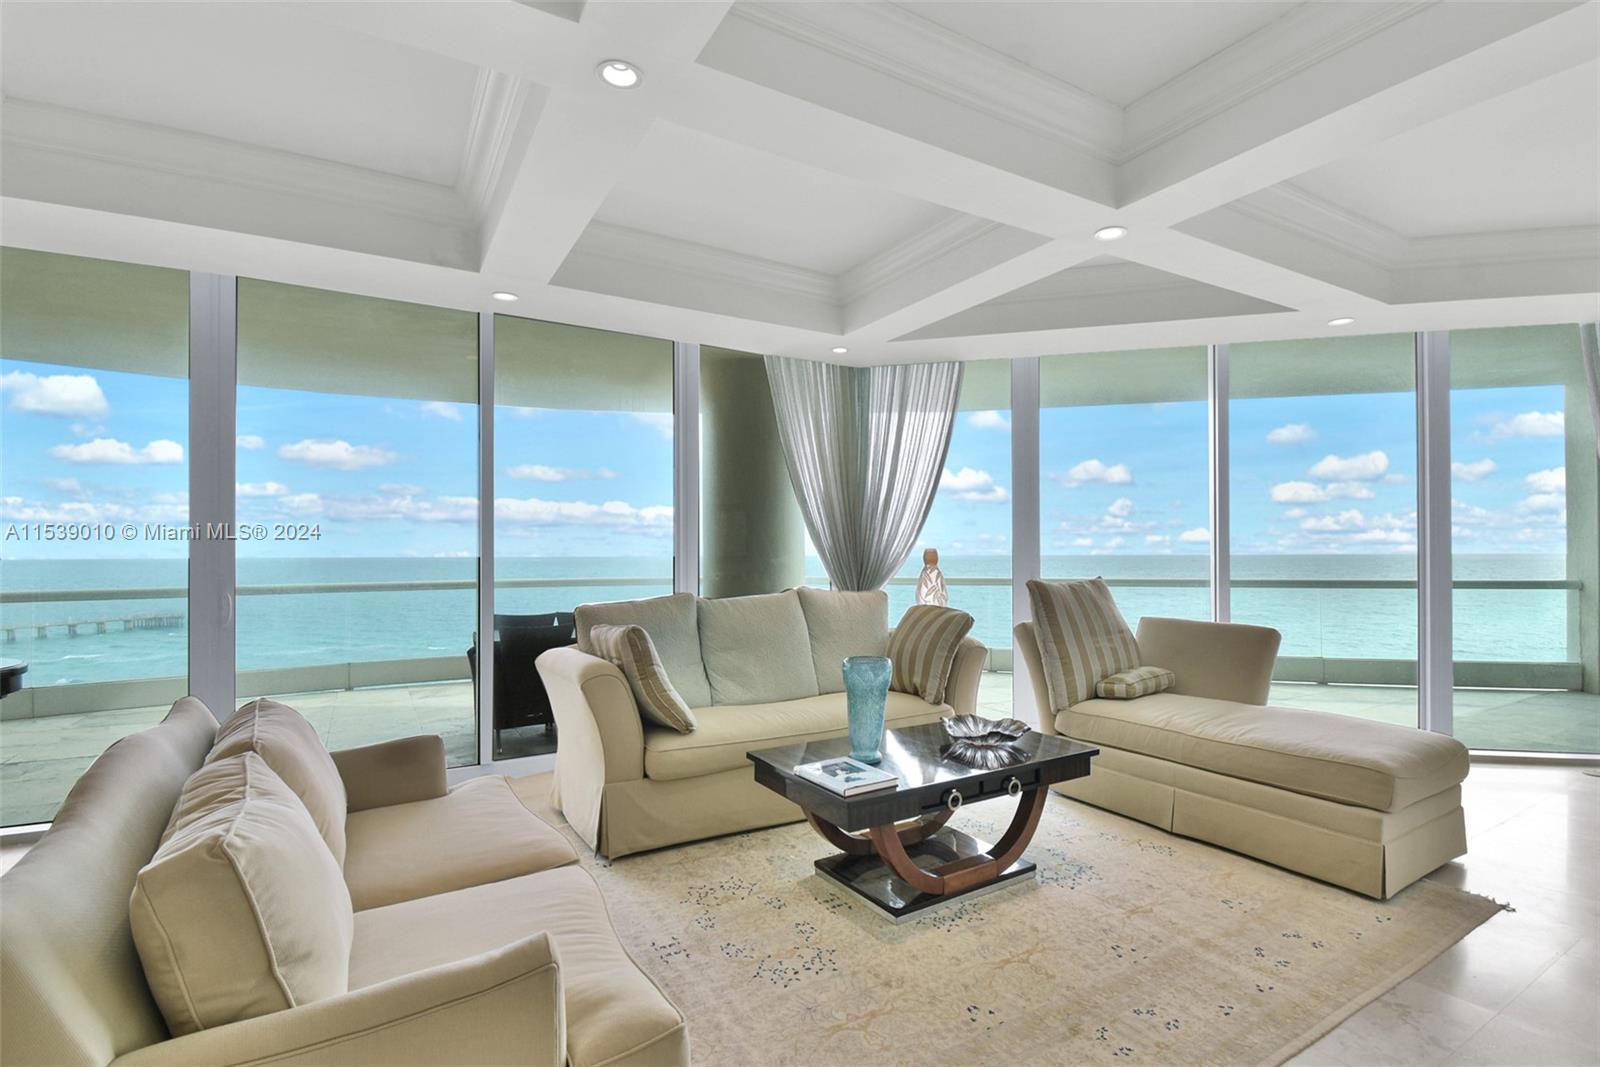 Turnberry Ocean Colony offers this extraordinary residence, providing breathtaking, unobstructed vie